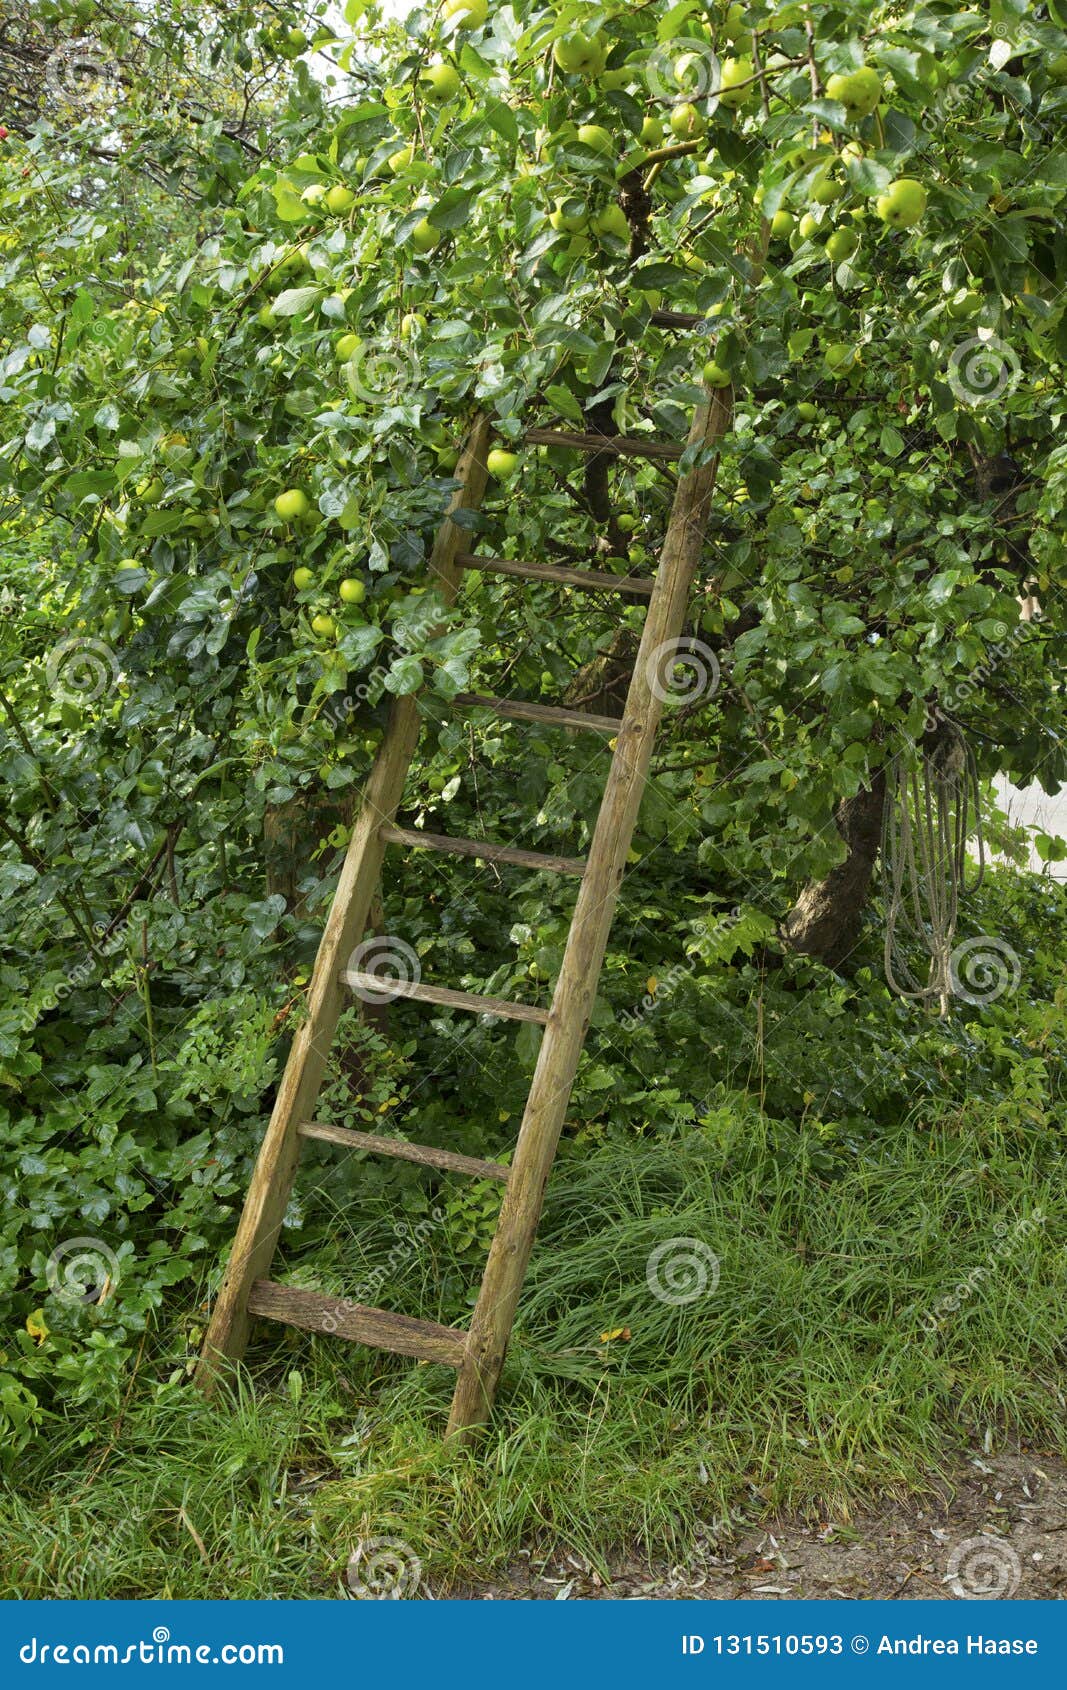 Country Garden With Old Ladder Stock Image Image Of Harvest